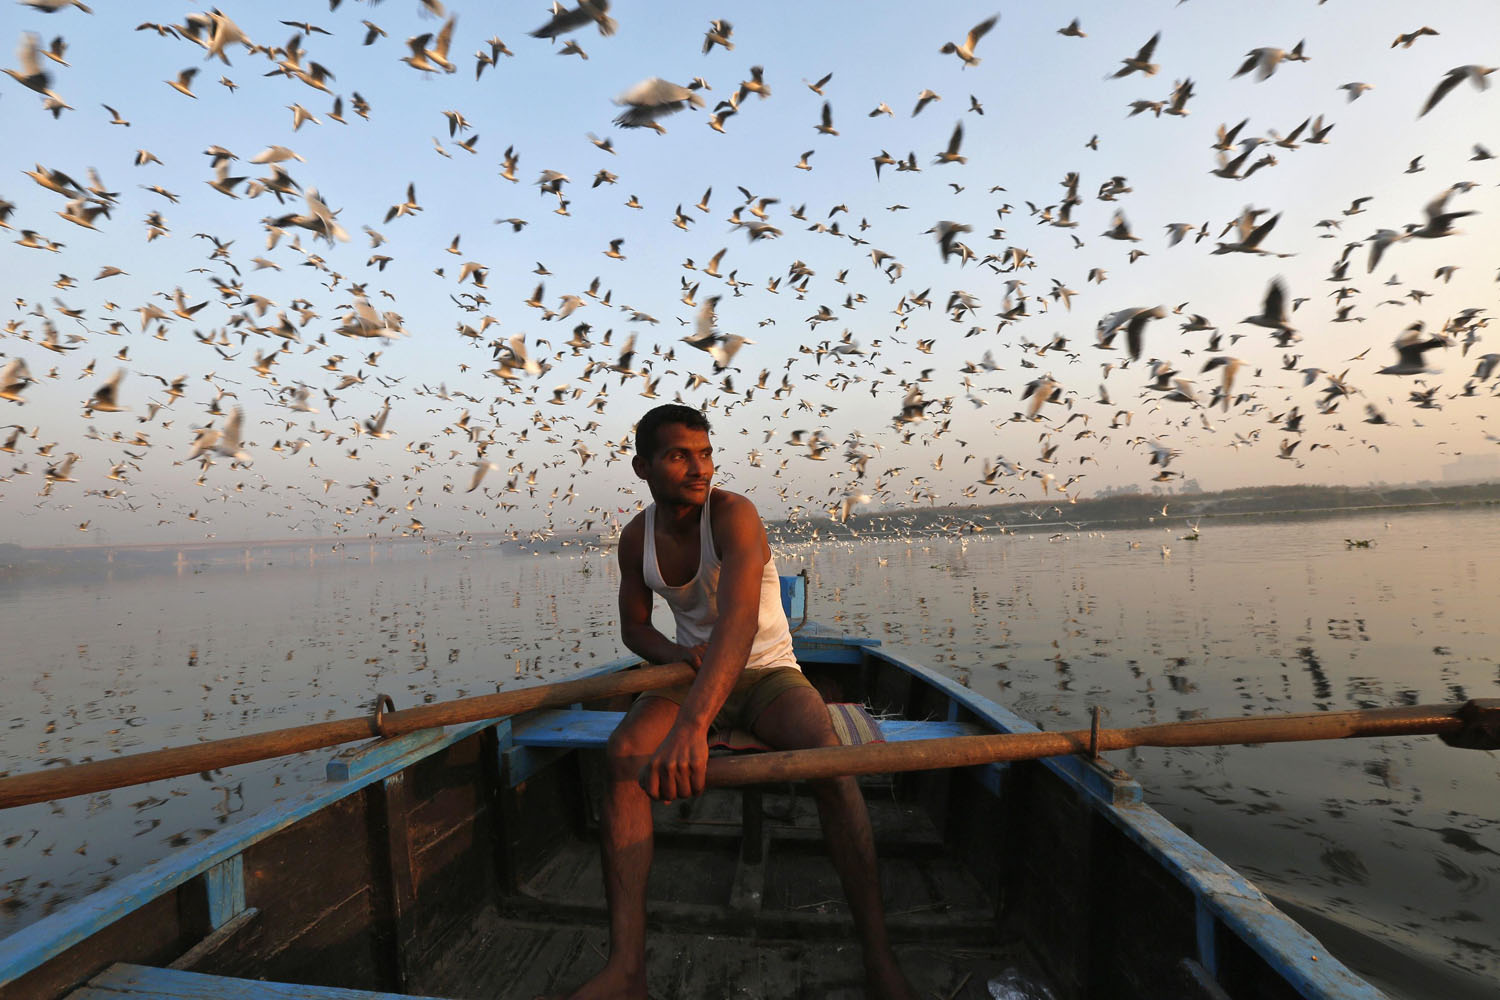 Migratory birds fly above a man rowing a boat in the waters of river Yamuna during early morning in old Delhi